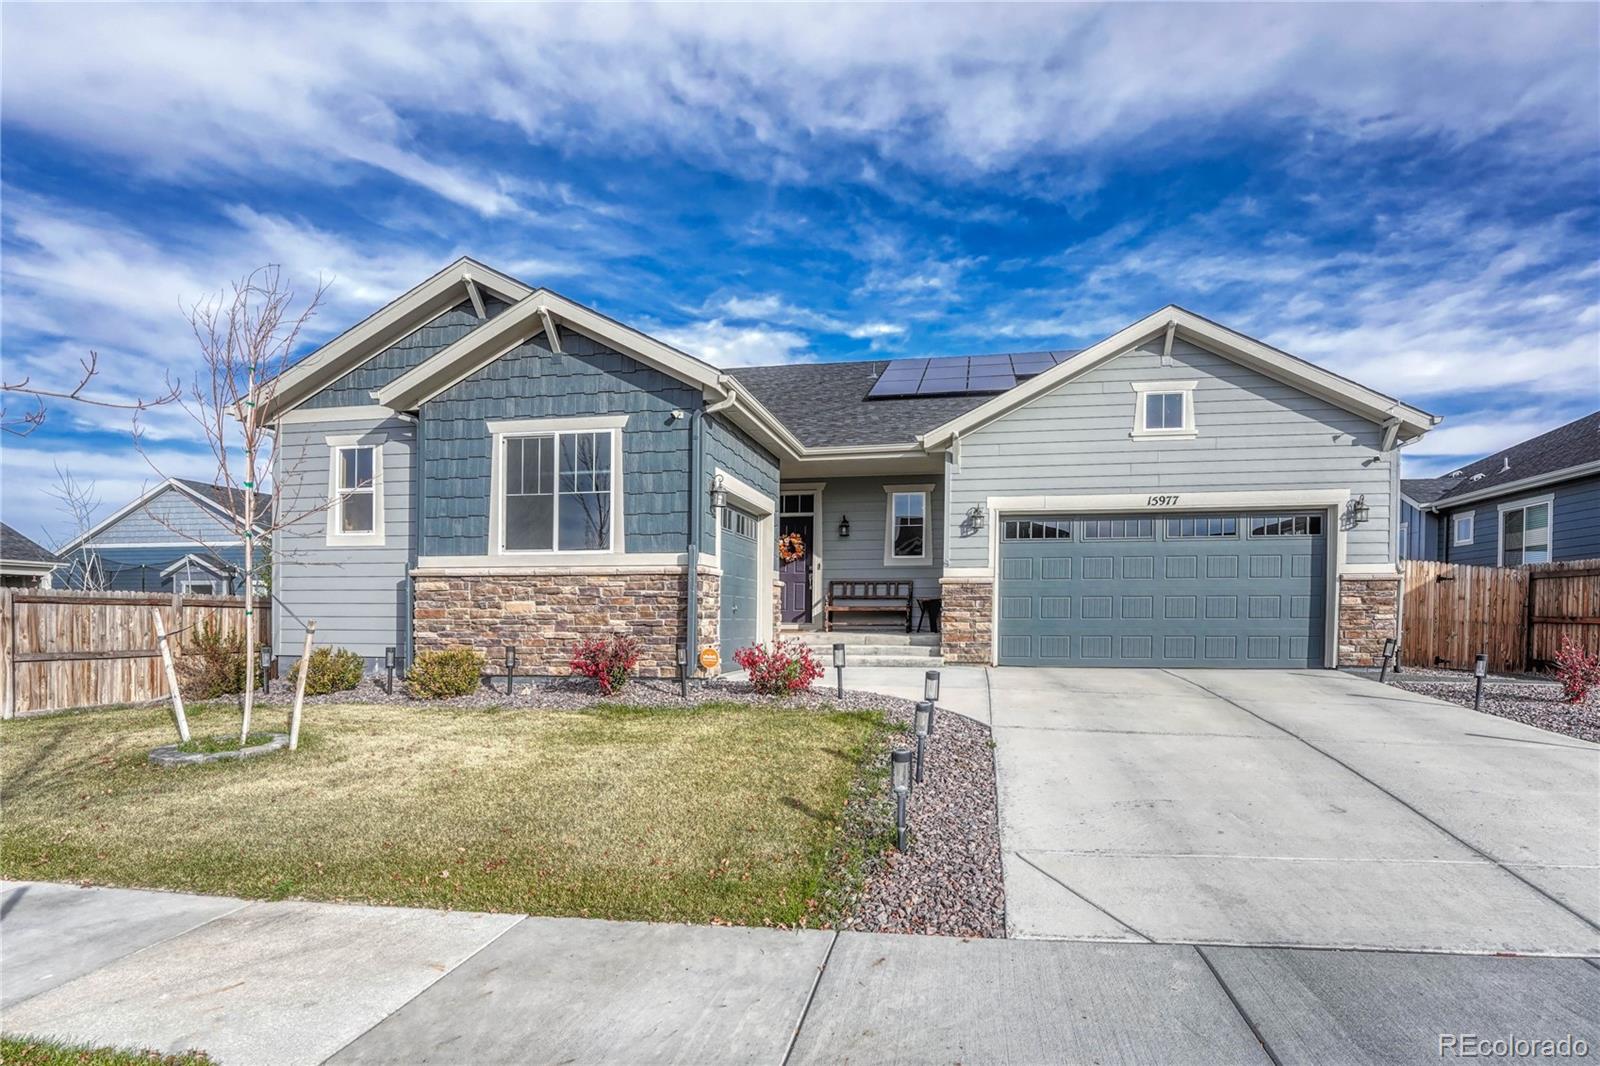 15977 E 115th Place, commerce city MLS: 6521252 Beds: 3 Baths: 3 Price: $675,000